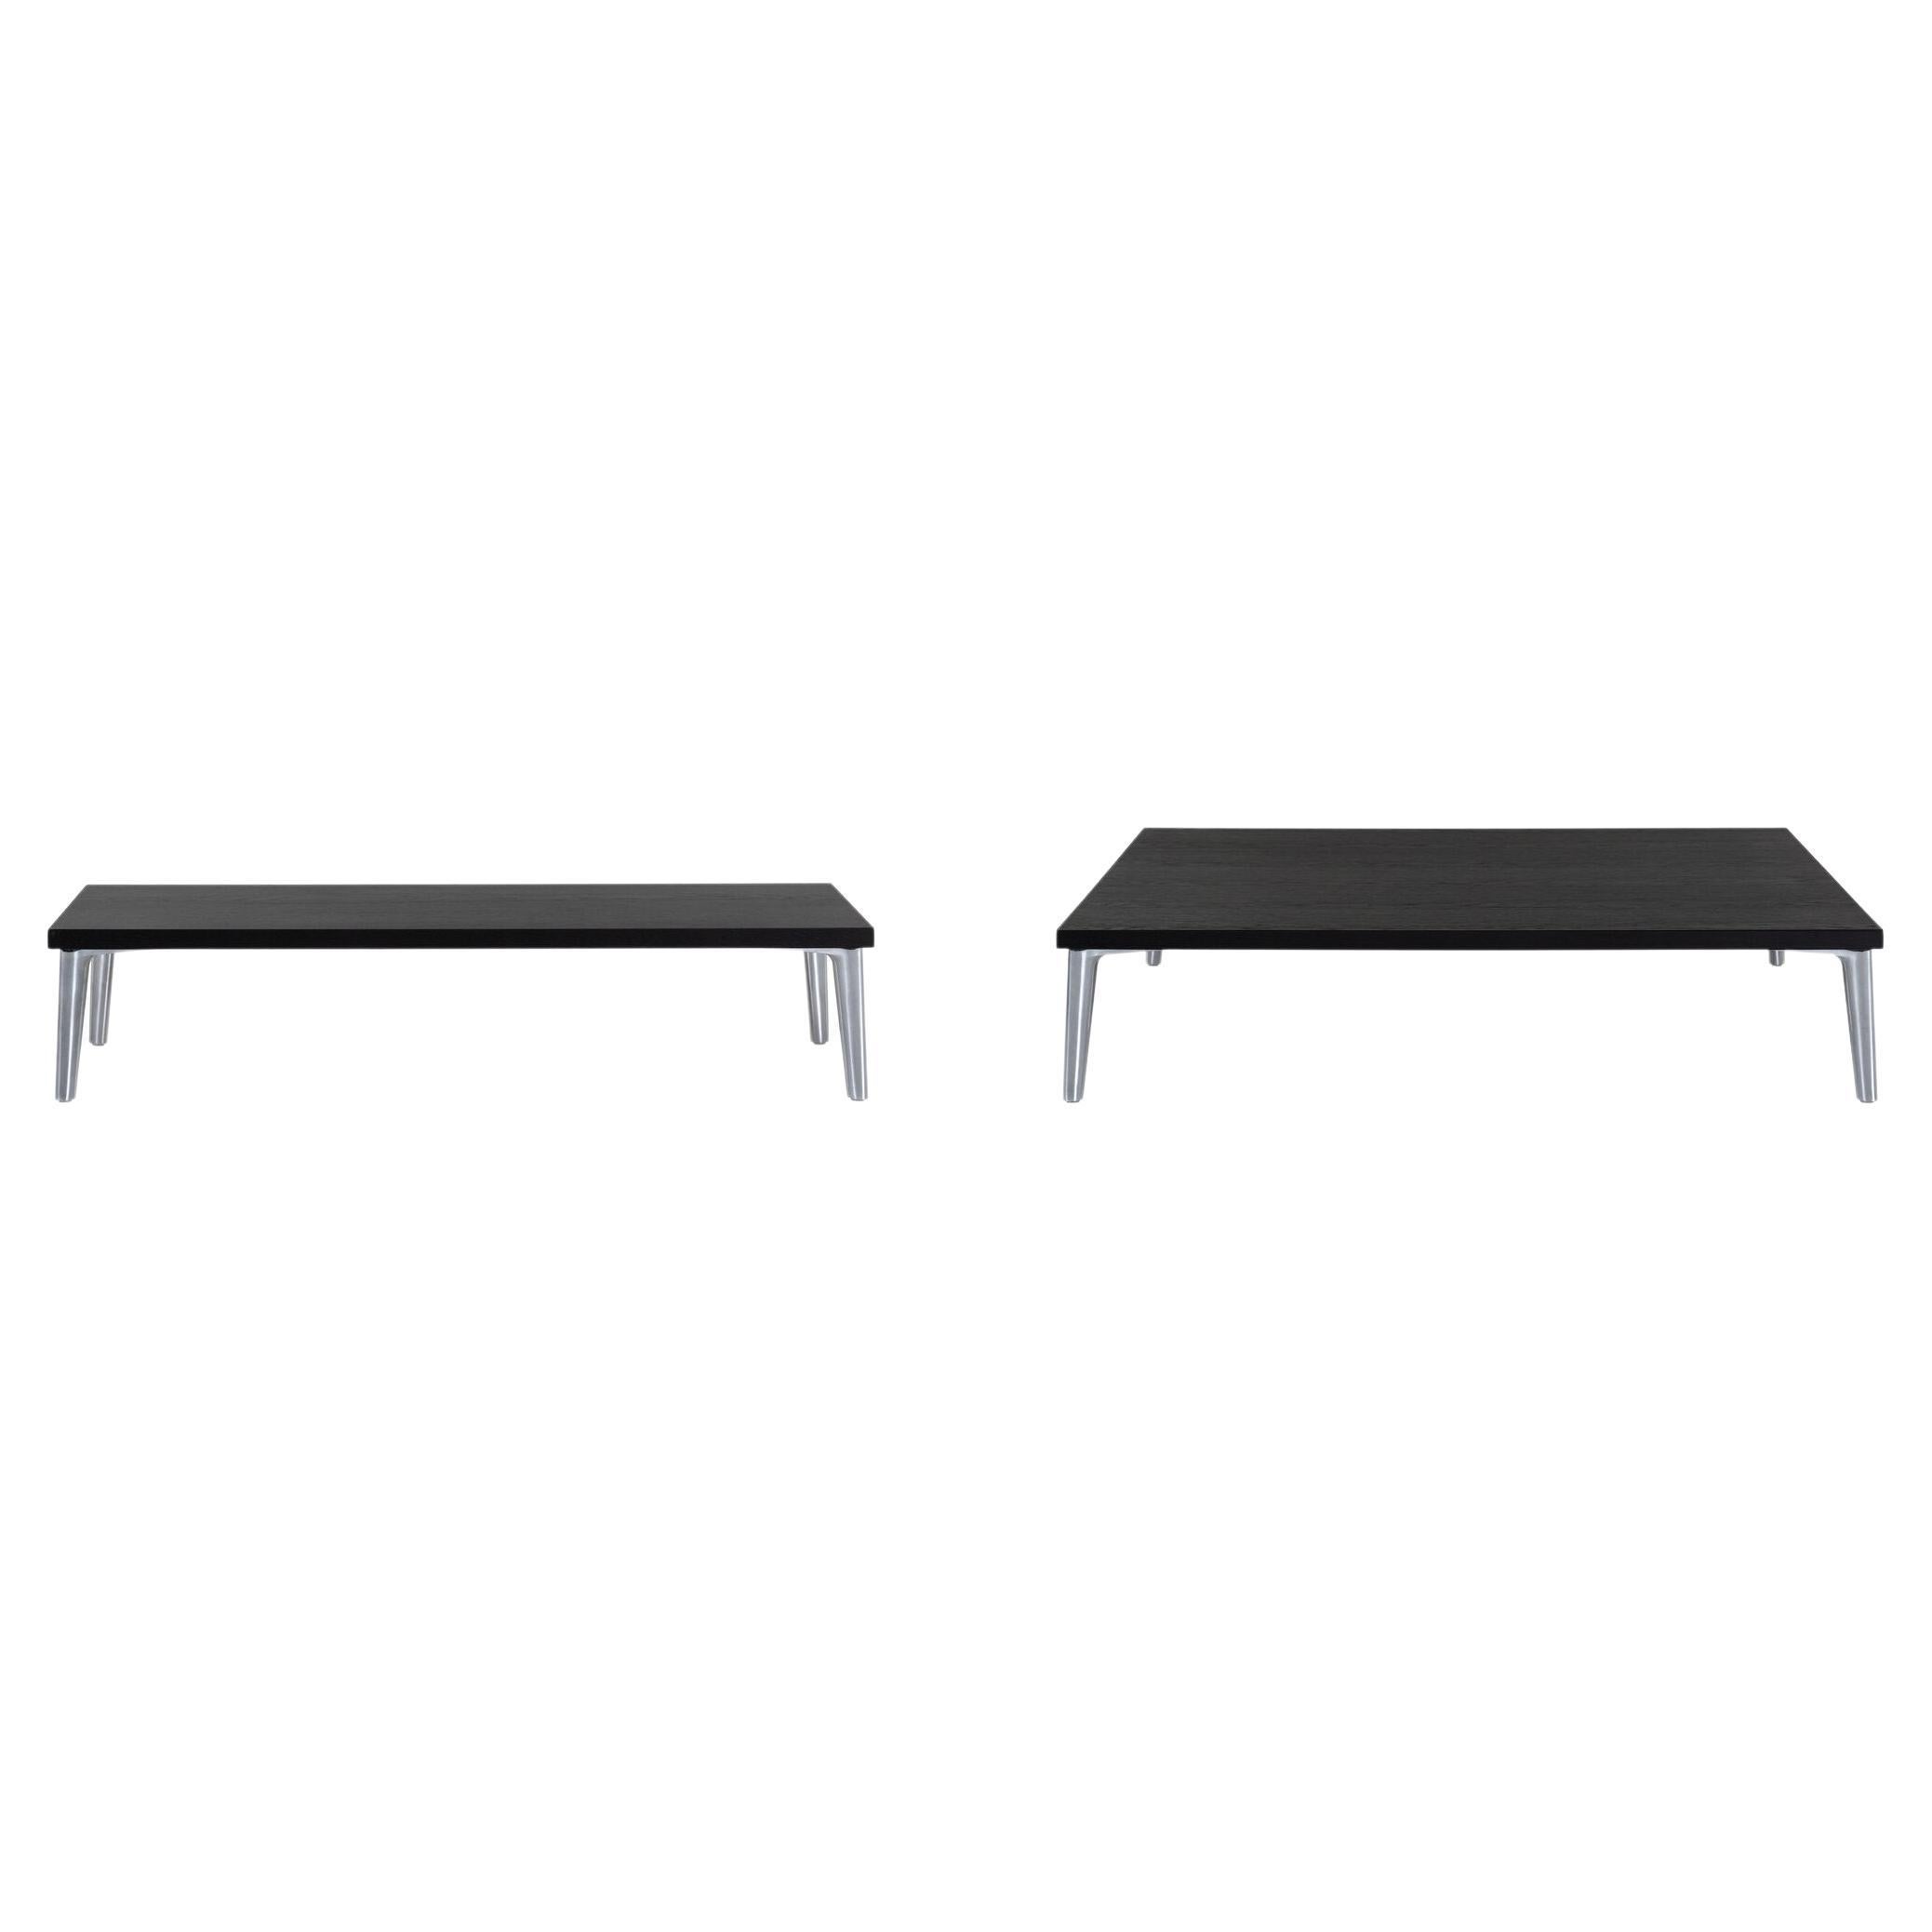 Moooi Sofa So Good Table Grey Stained by Marcel Wanders Studio For Sale